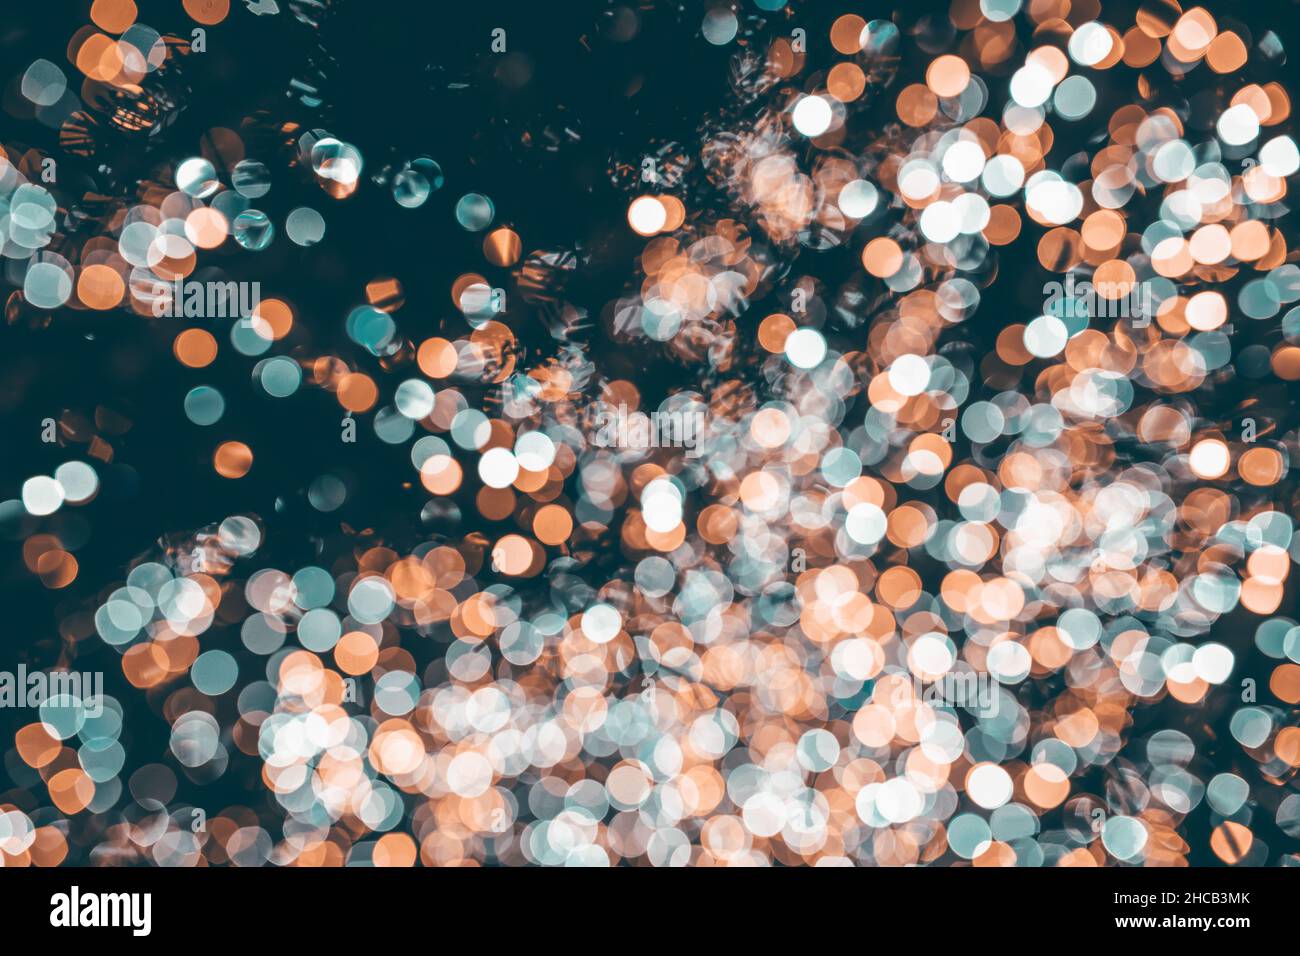 magic-holiday-background-of-sprkling-bokeh-christmas-lights-stock